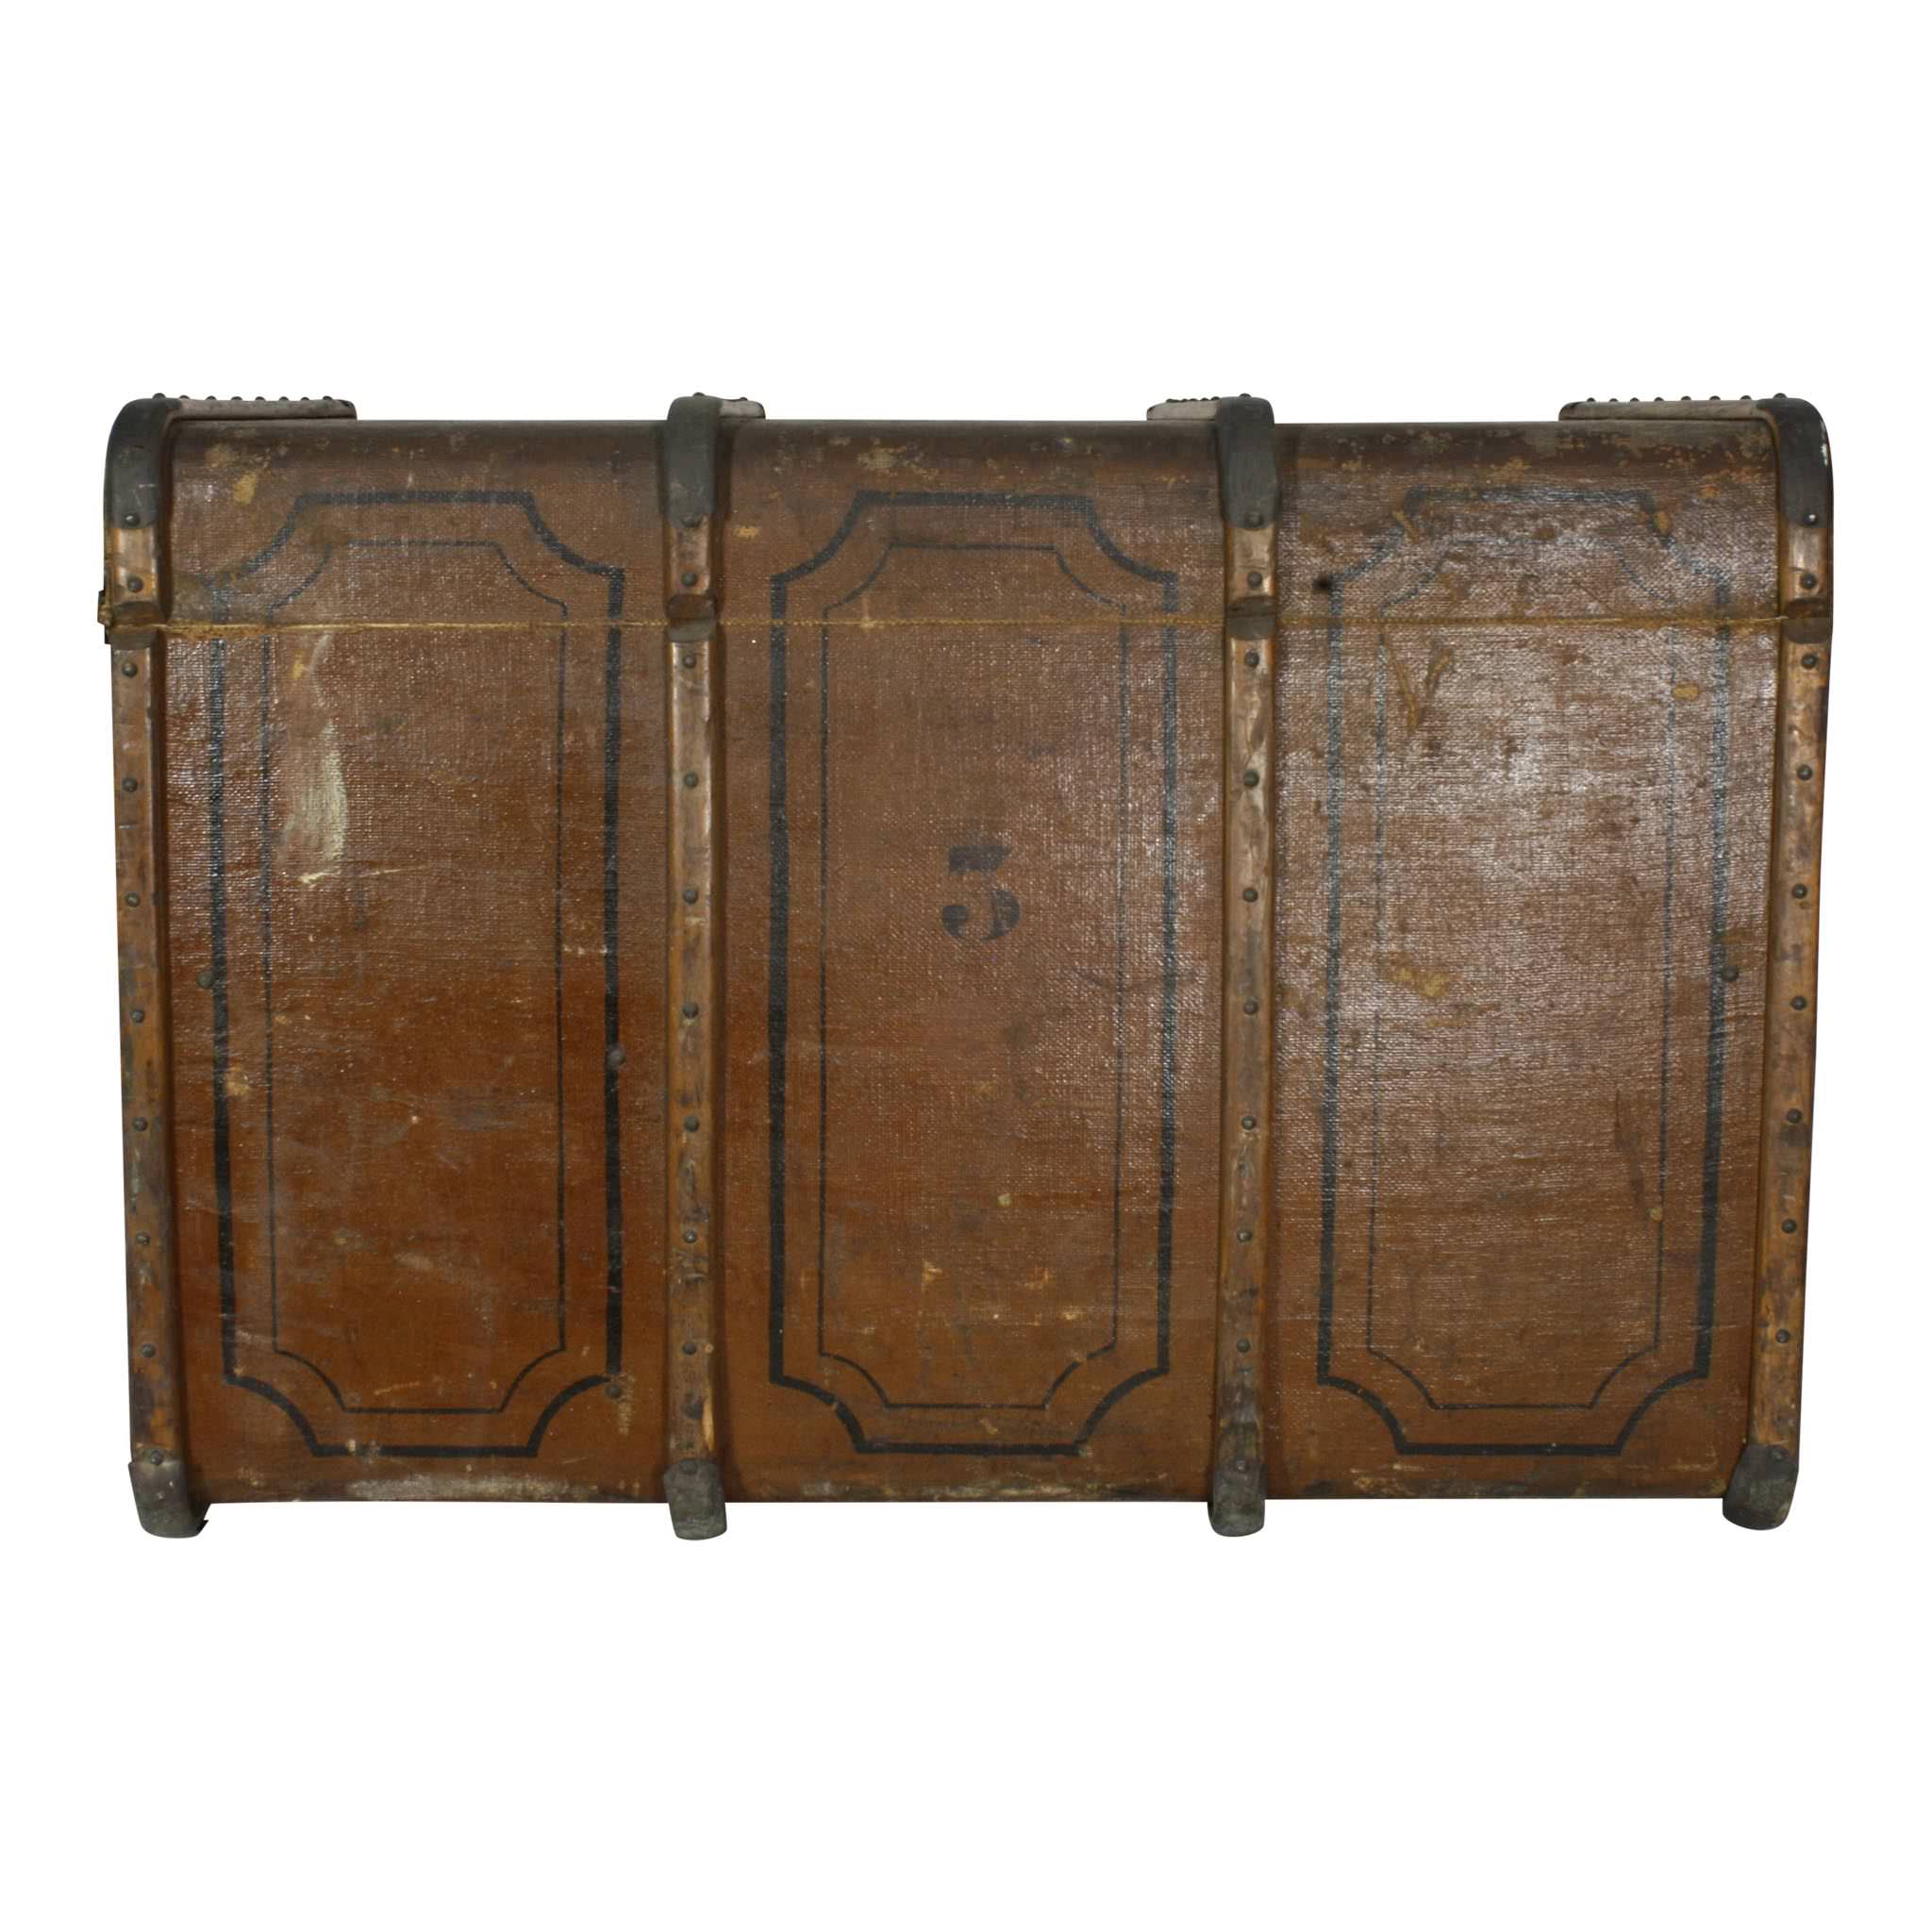 Romanian Canvas Steamer Trunk with Trays